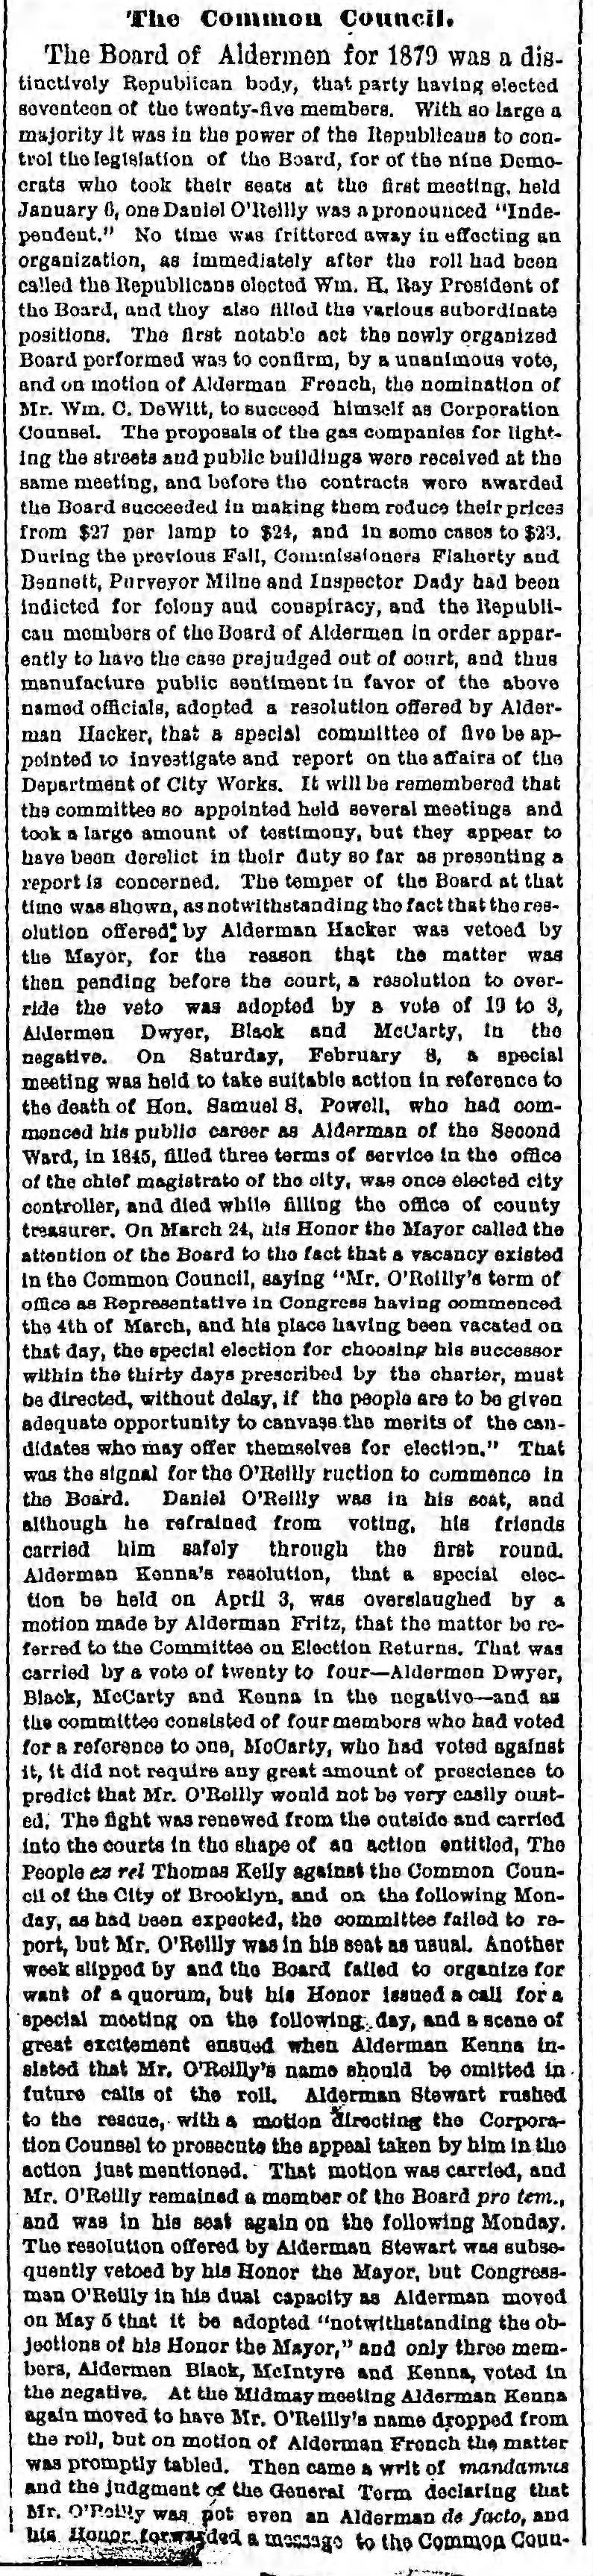 Wednesday, December 31, 1879 - Page 2 - 1 of 2